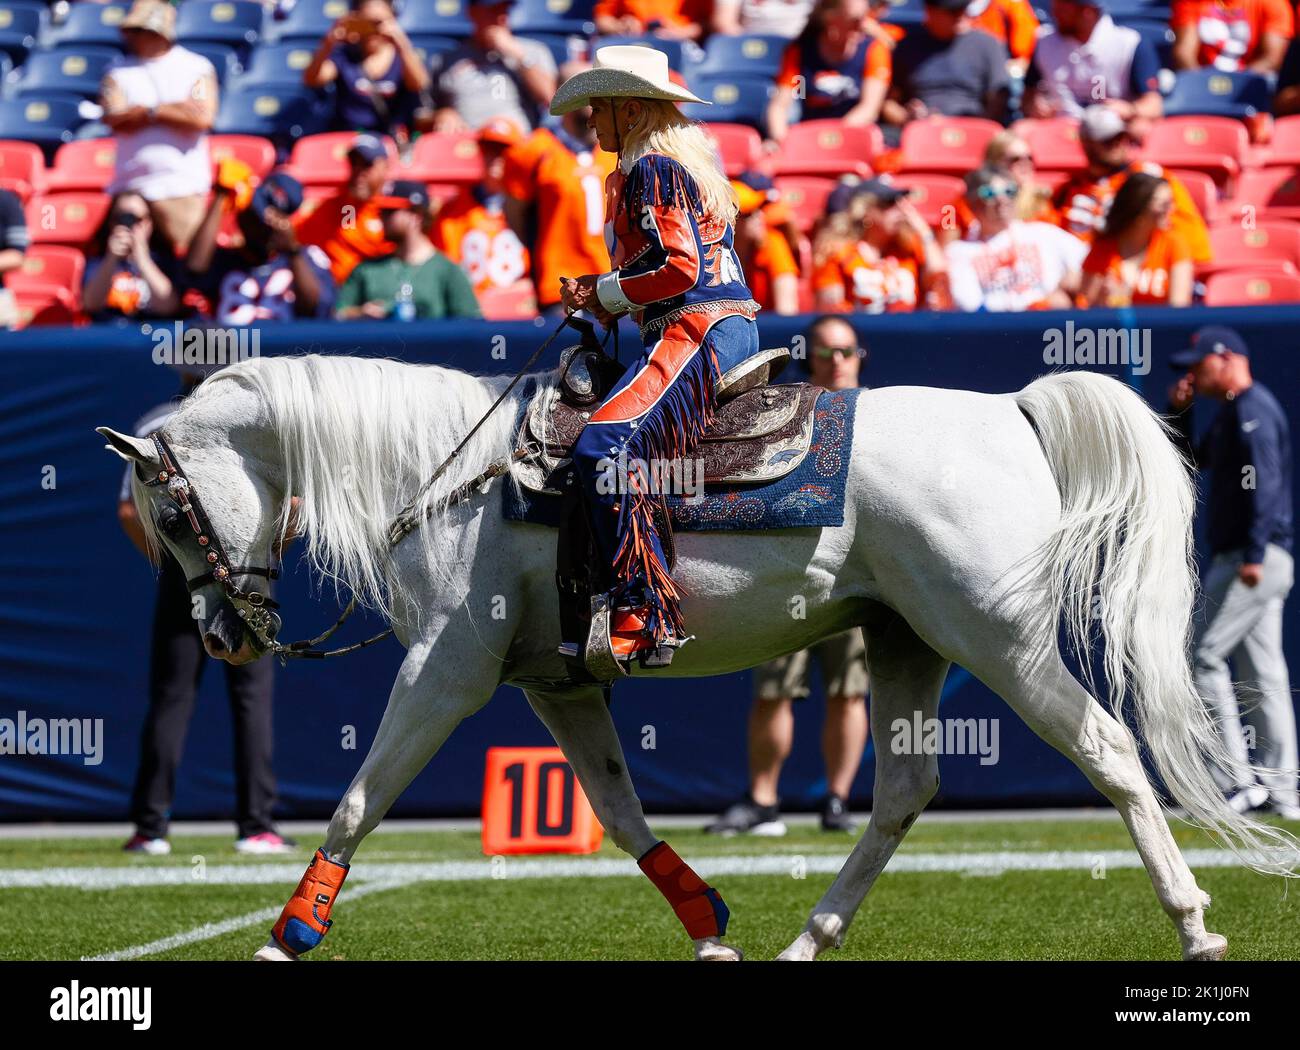 Denver, USA. 18th Sep, 2022. Denver, CO, USA. 18th Sep, 2022. Denver Broncos mascot Thunder runs on the field before in the first half of the football game between the Denver Broncos and Houston Texans at Empower Field Field in Denver, CO. Derek Regensburger/CSM/Alamy Live News Credit: Cal Sport Media/Alamy Live News Stock Photo